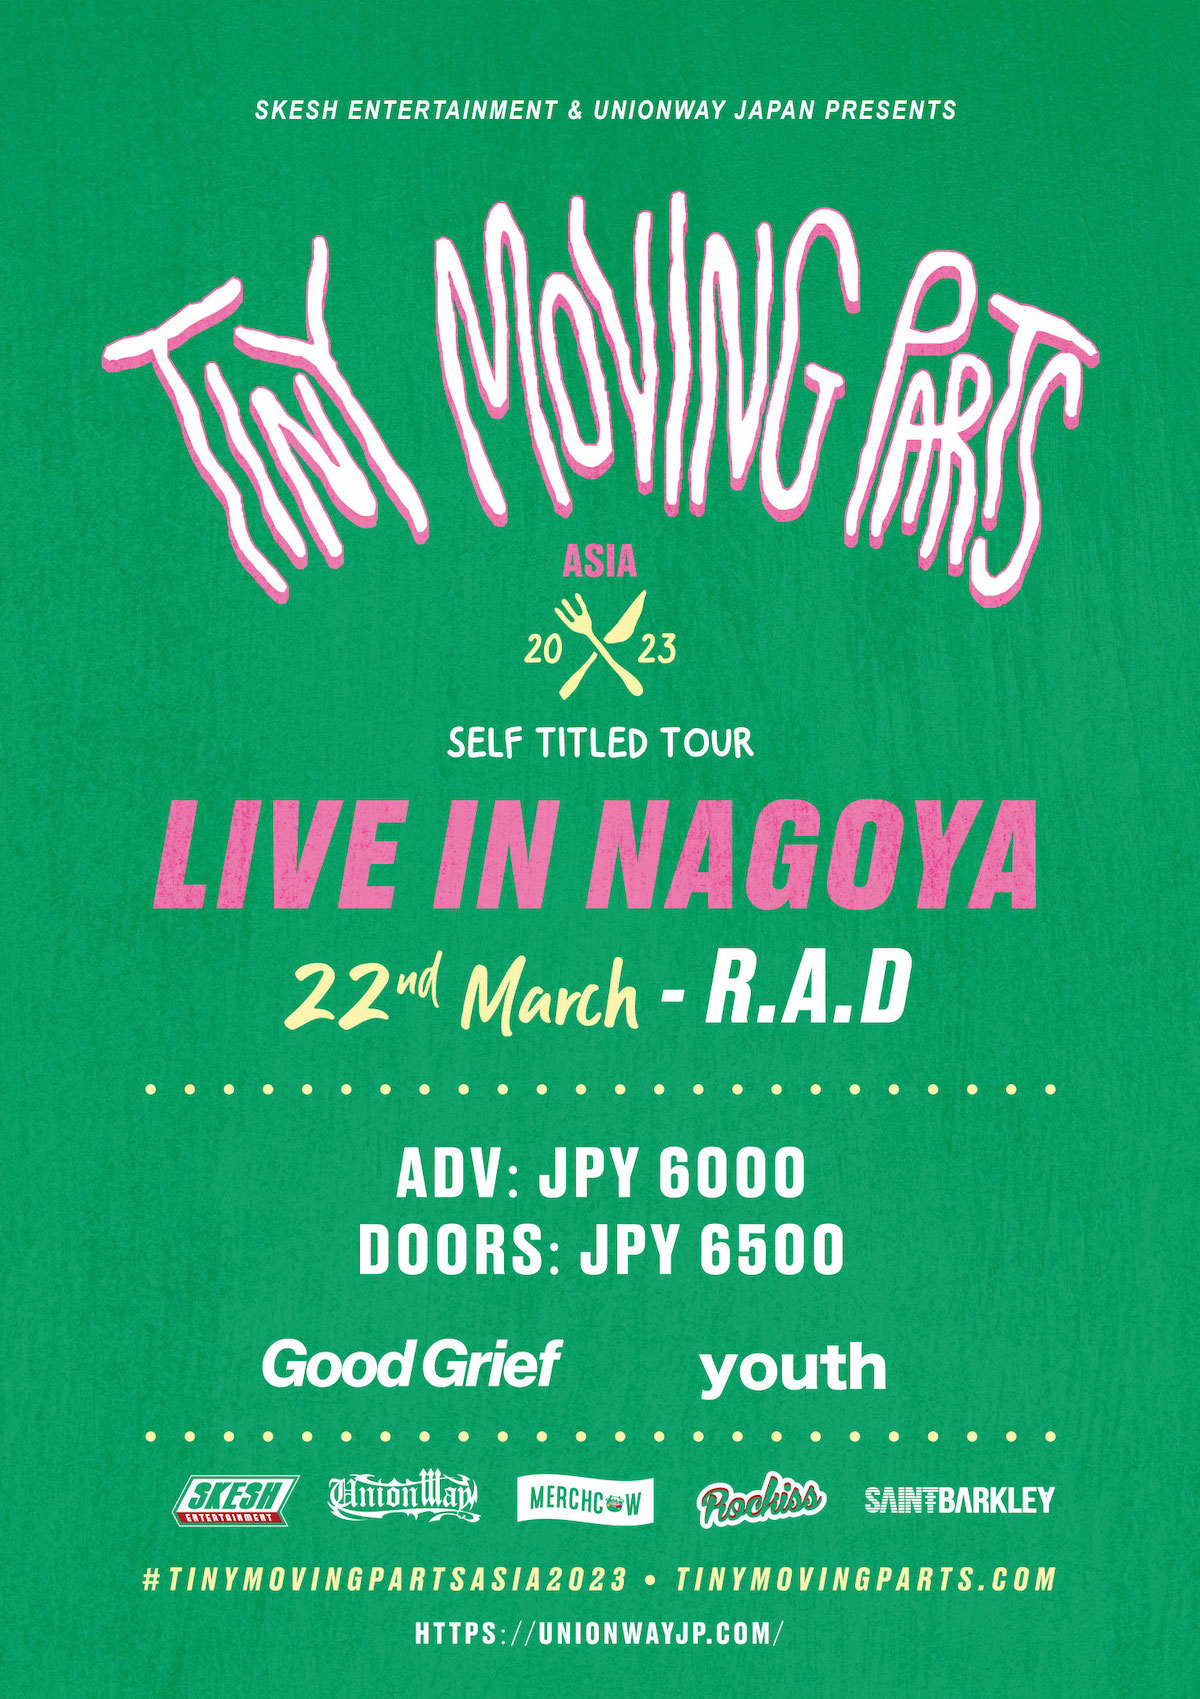 3.22 TINY MOVING PARTS 「SELF TITLED ASIA TOUR 2023」名古屋 R.A.Dの写真